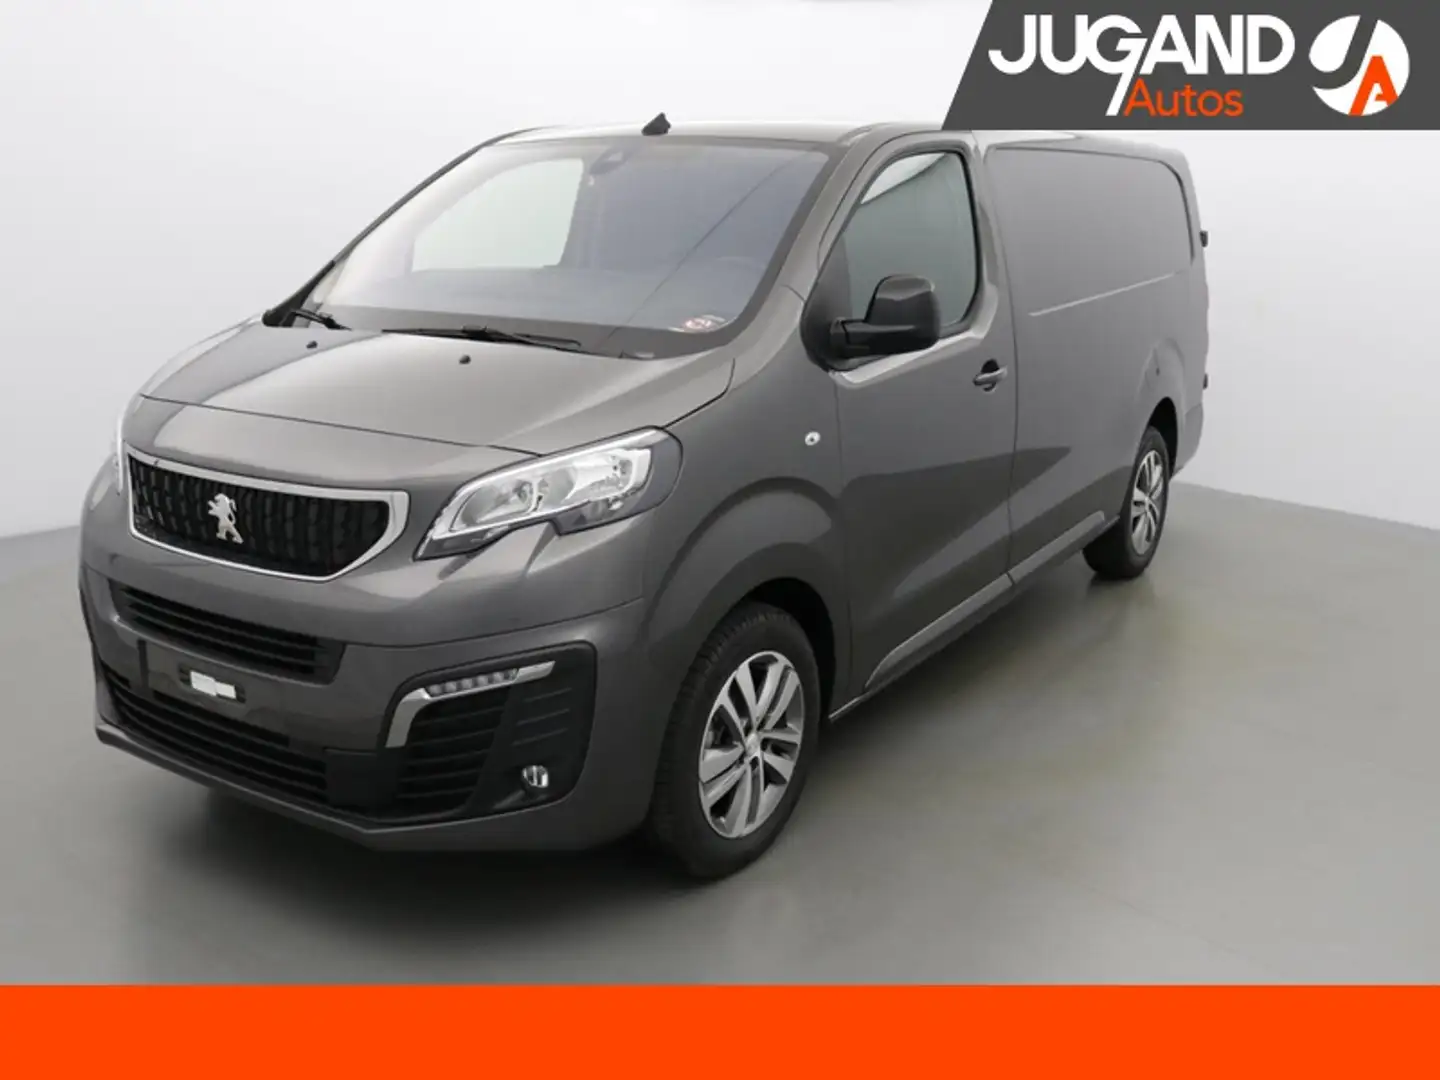 Peugeot Expert FOURGON BUSINESS 180 HDI EAT8 Gris - 1